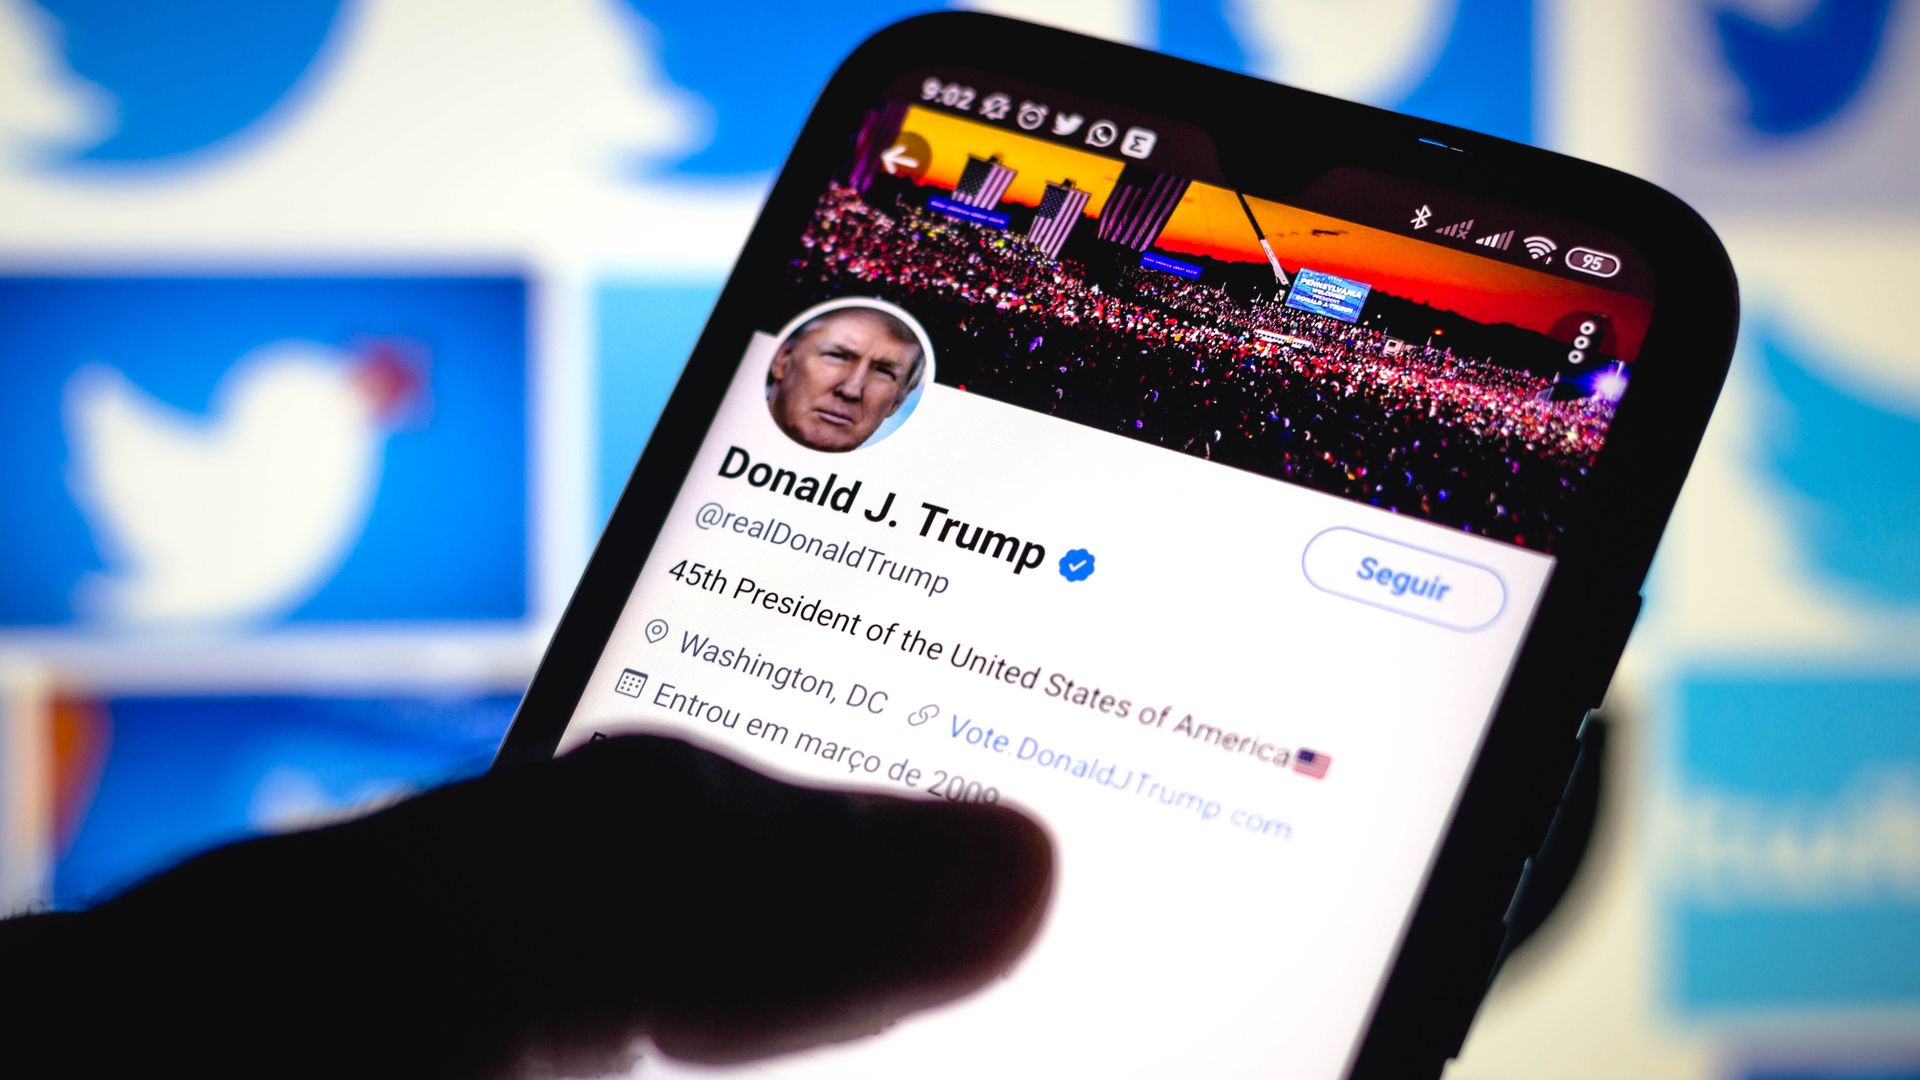 Photo of a person's hand holding a phone with Donald Trump's Twitter account on the screen